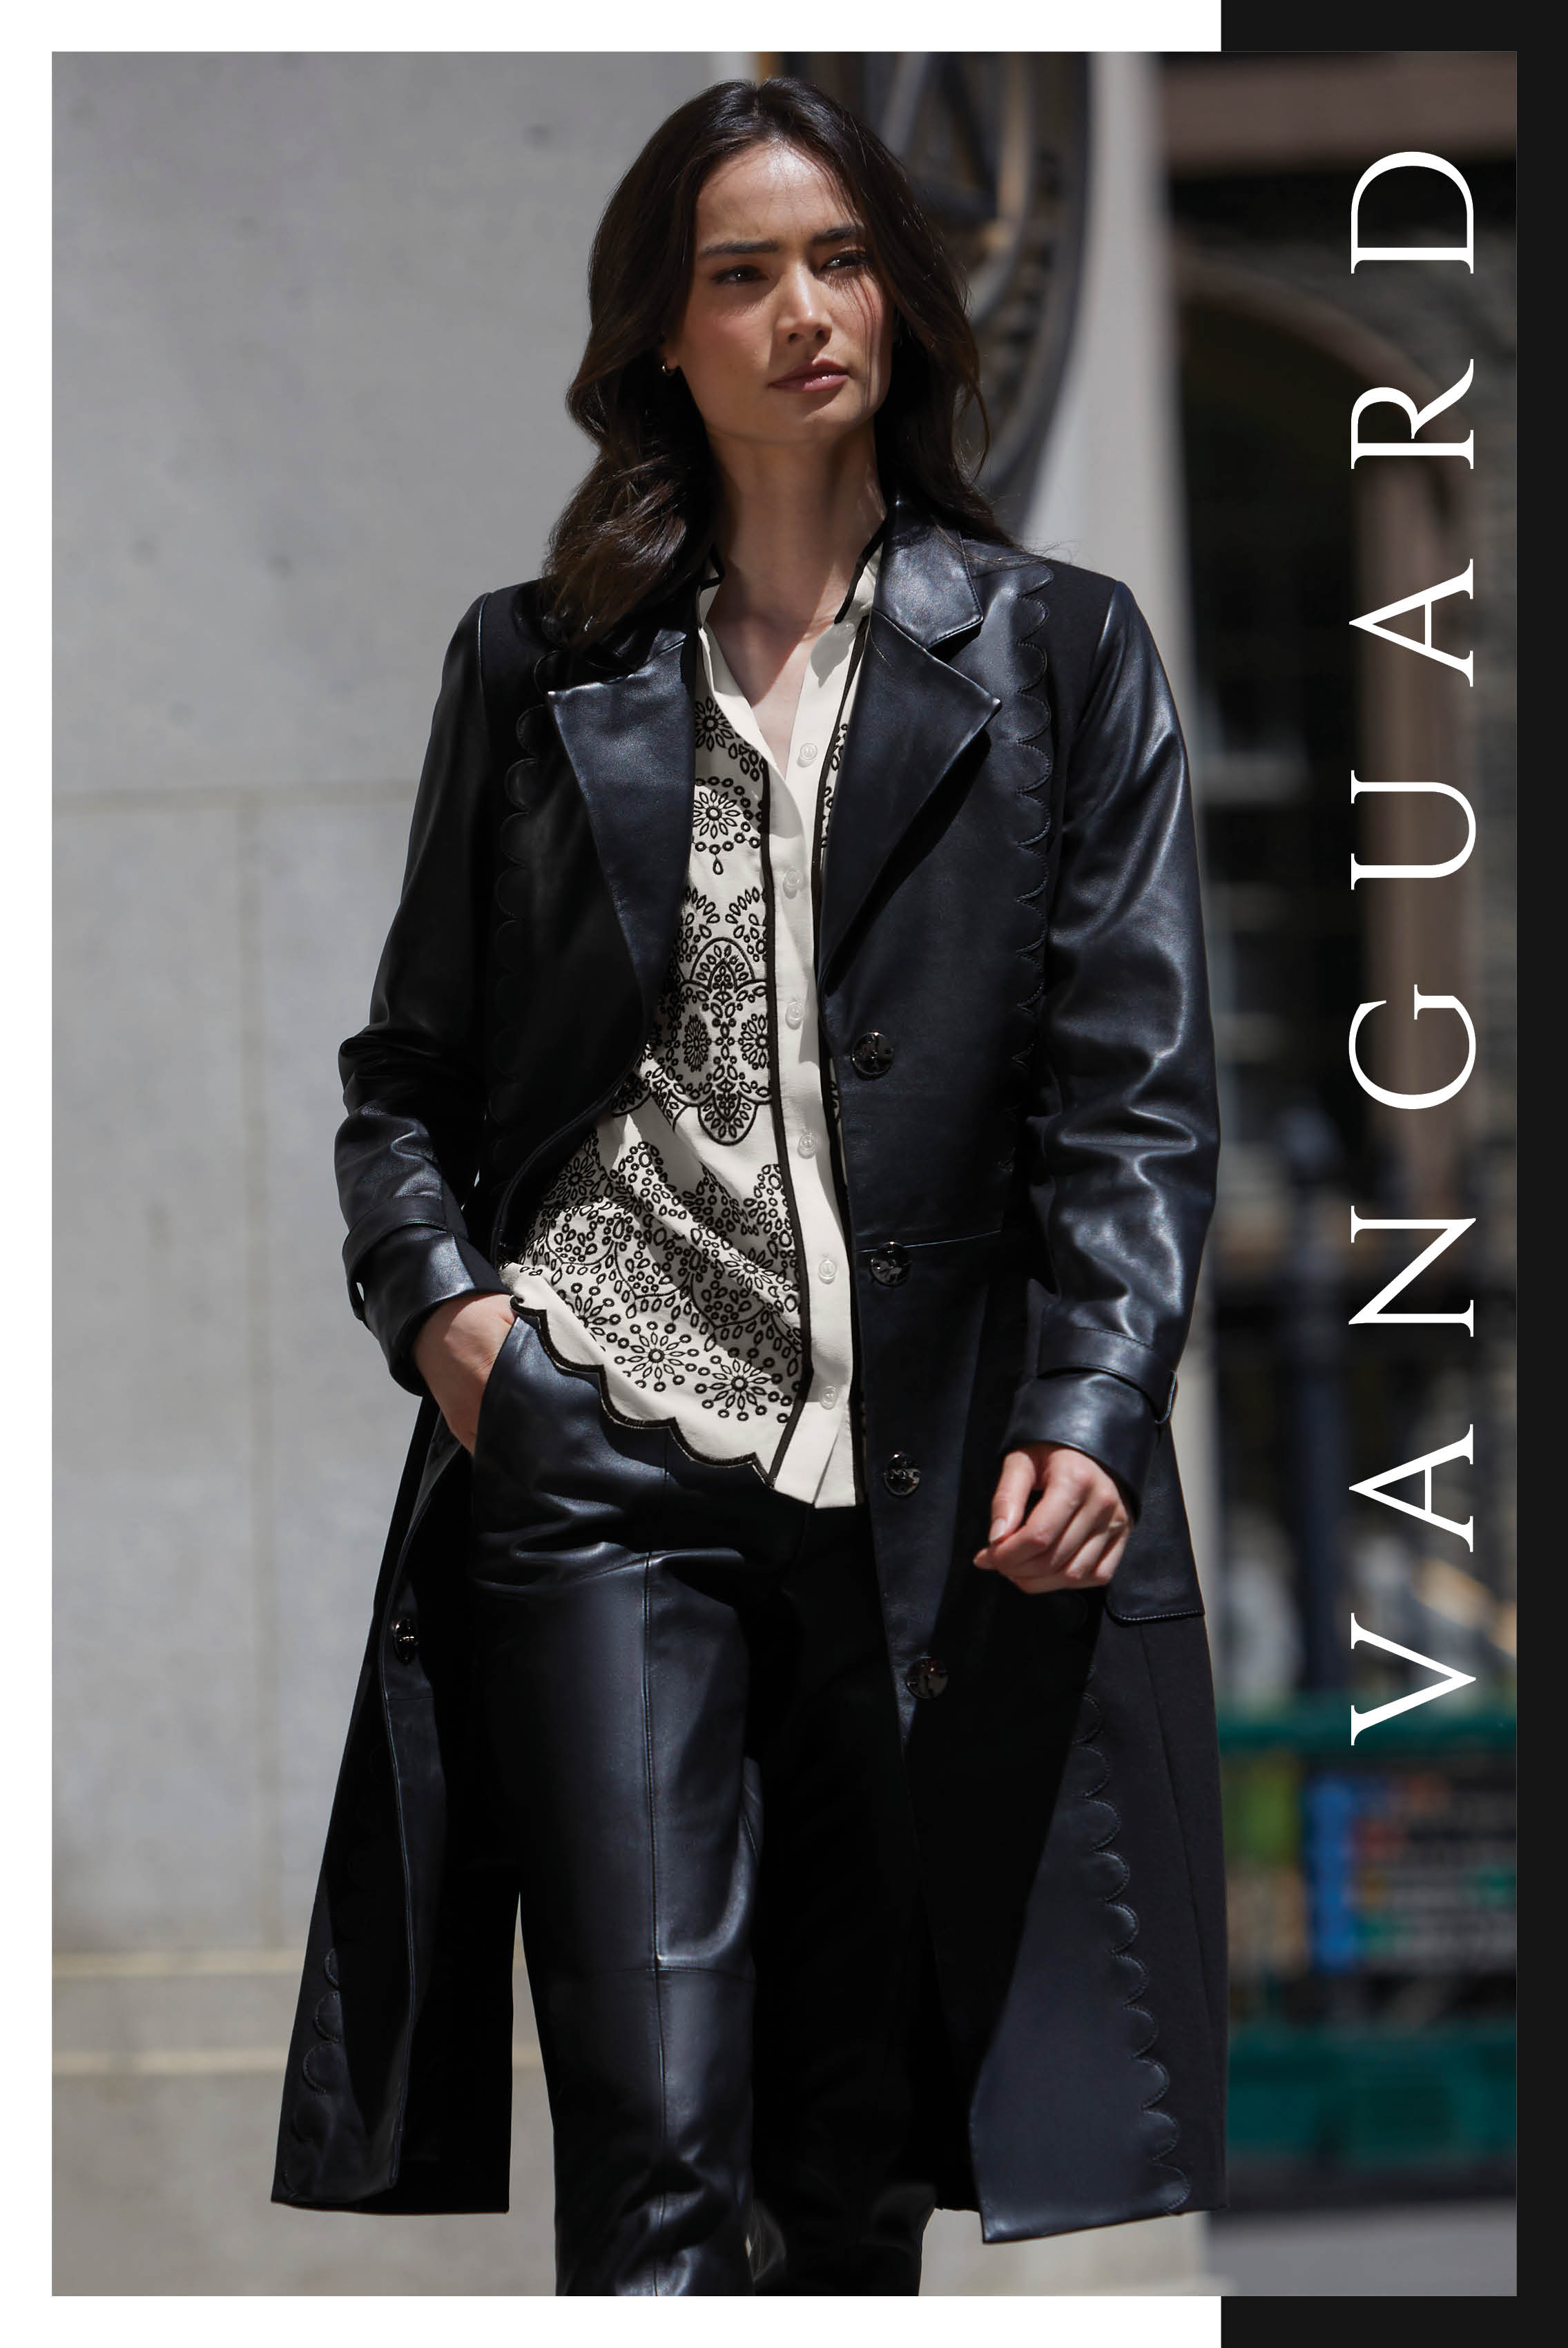 Express your upmarket savvy in an outfit decorated with feminine scalloping. The black leather and ponte knit jacket brims with the rhythmic appeal of front and back scallops.